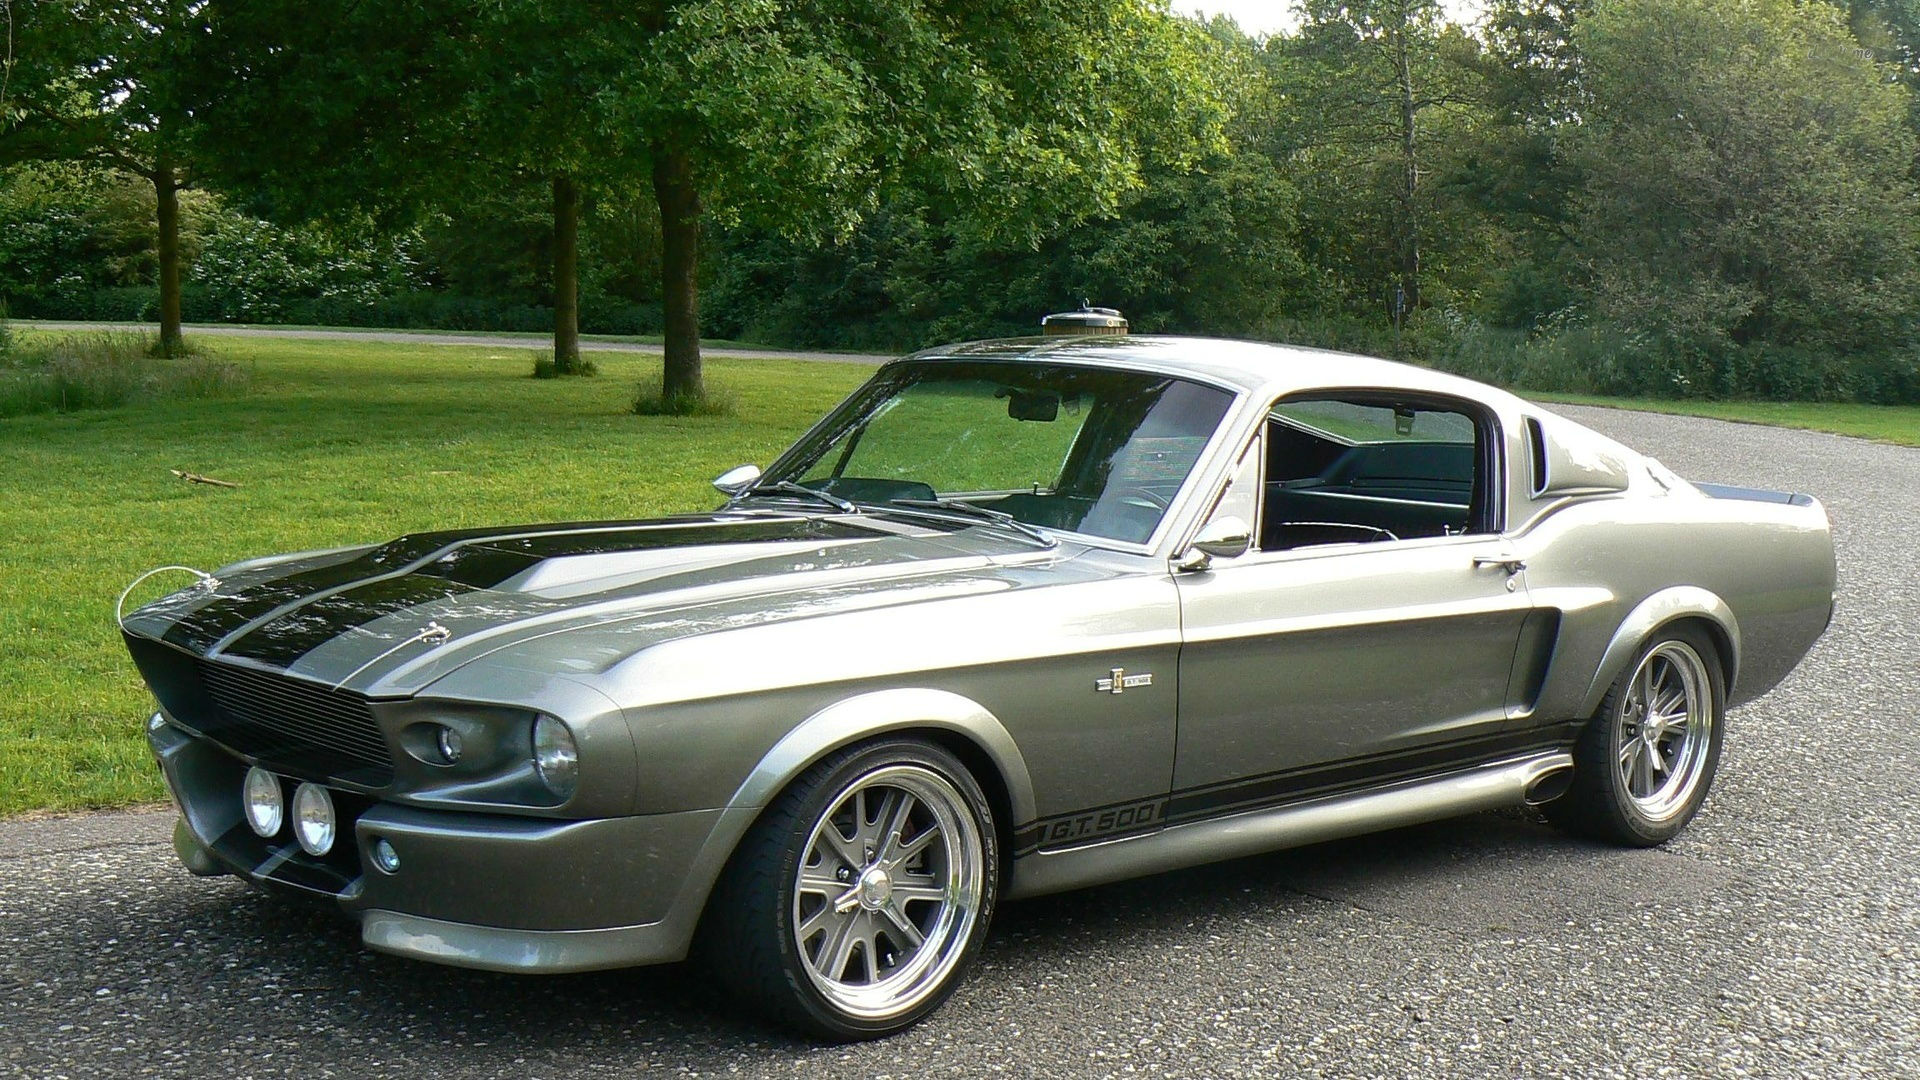 Classic Ford Mustang Shelby Gt Wallpaper HD